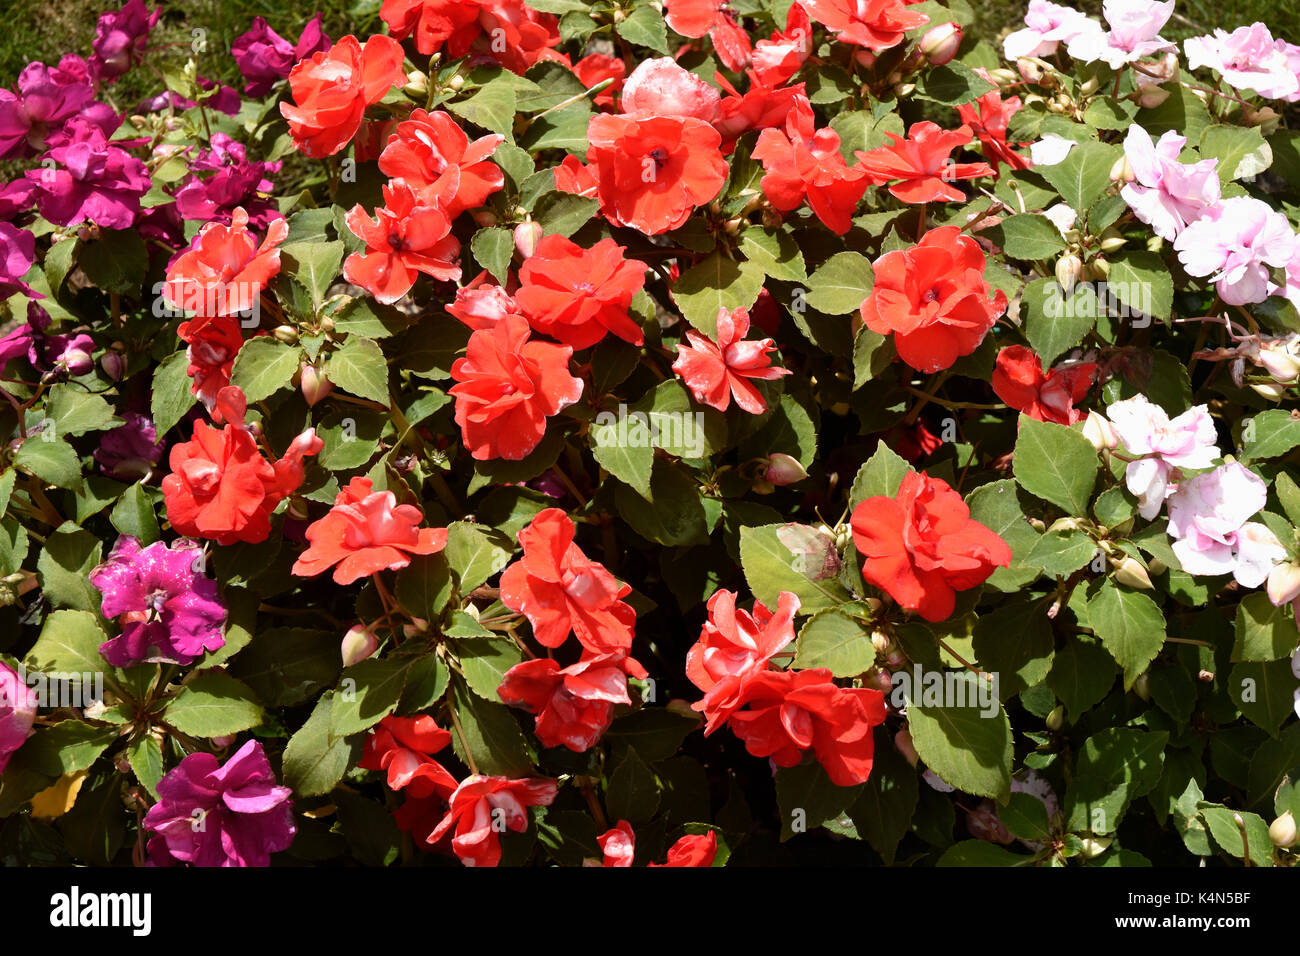 Display of  flowers -massed brightly coloured impatins - filling the whole picture- summer sunlight Stock Photo